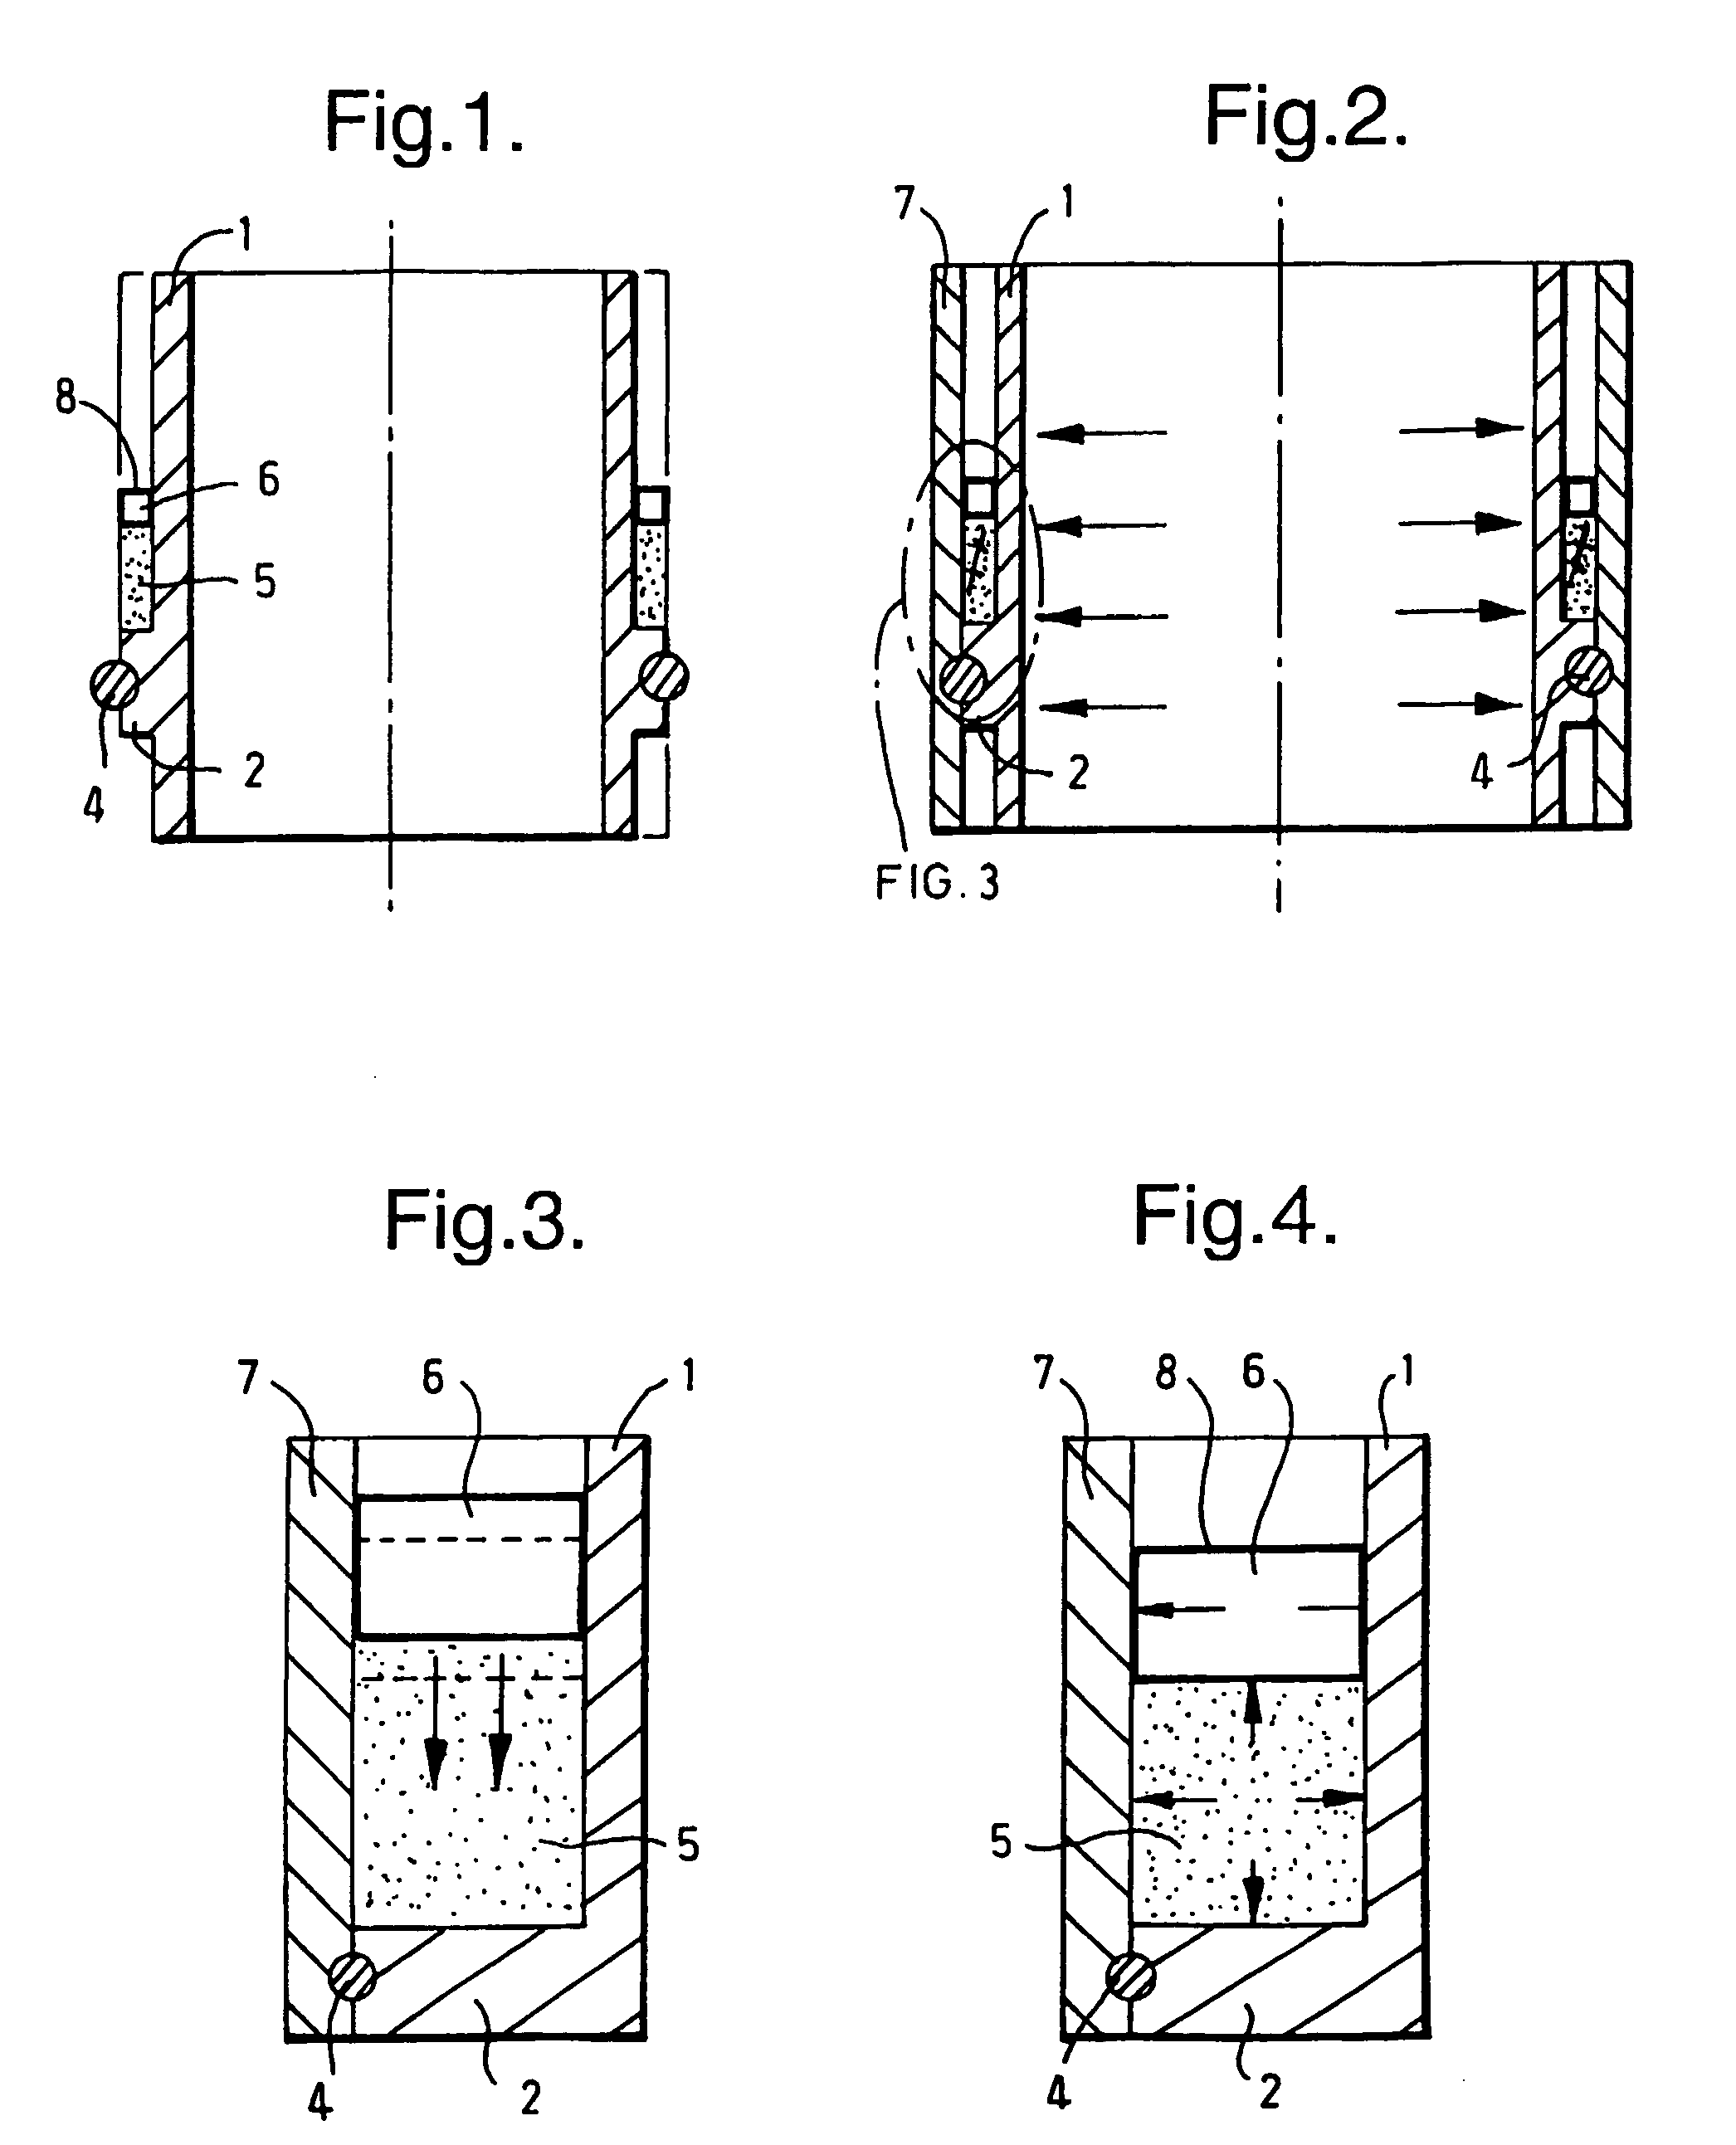 In-situ casting of well equipment